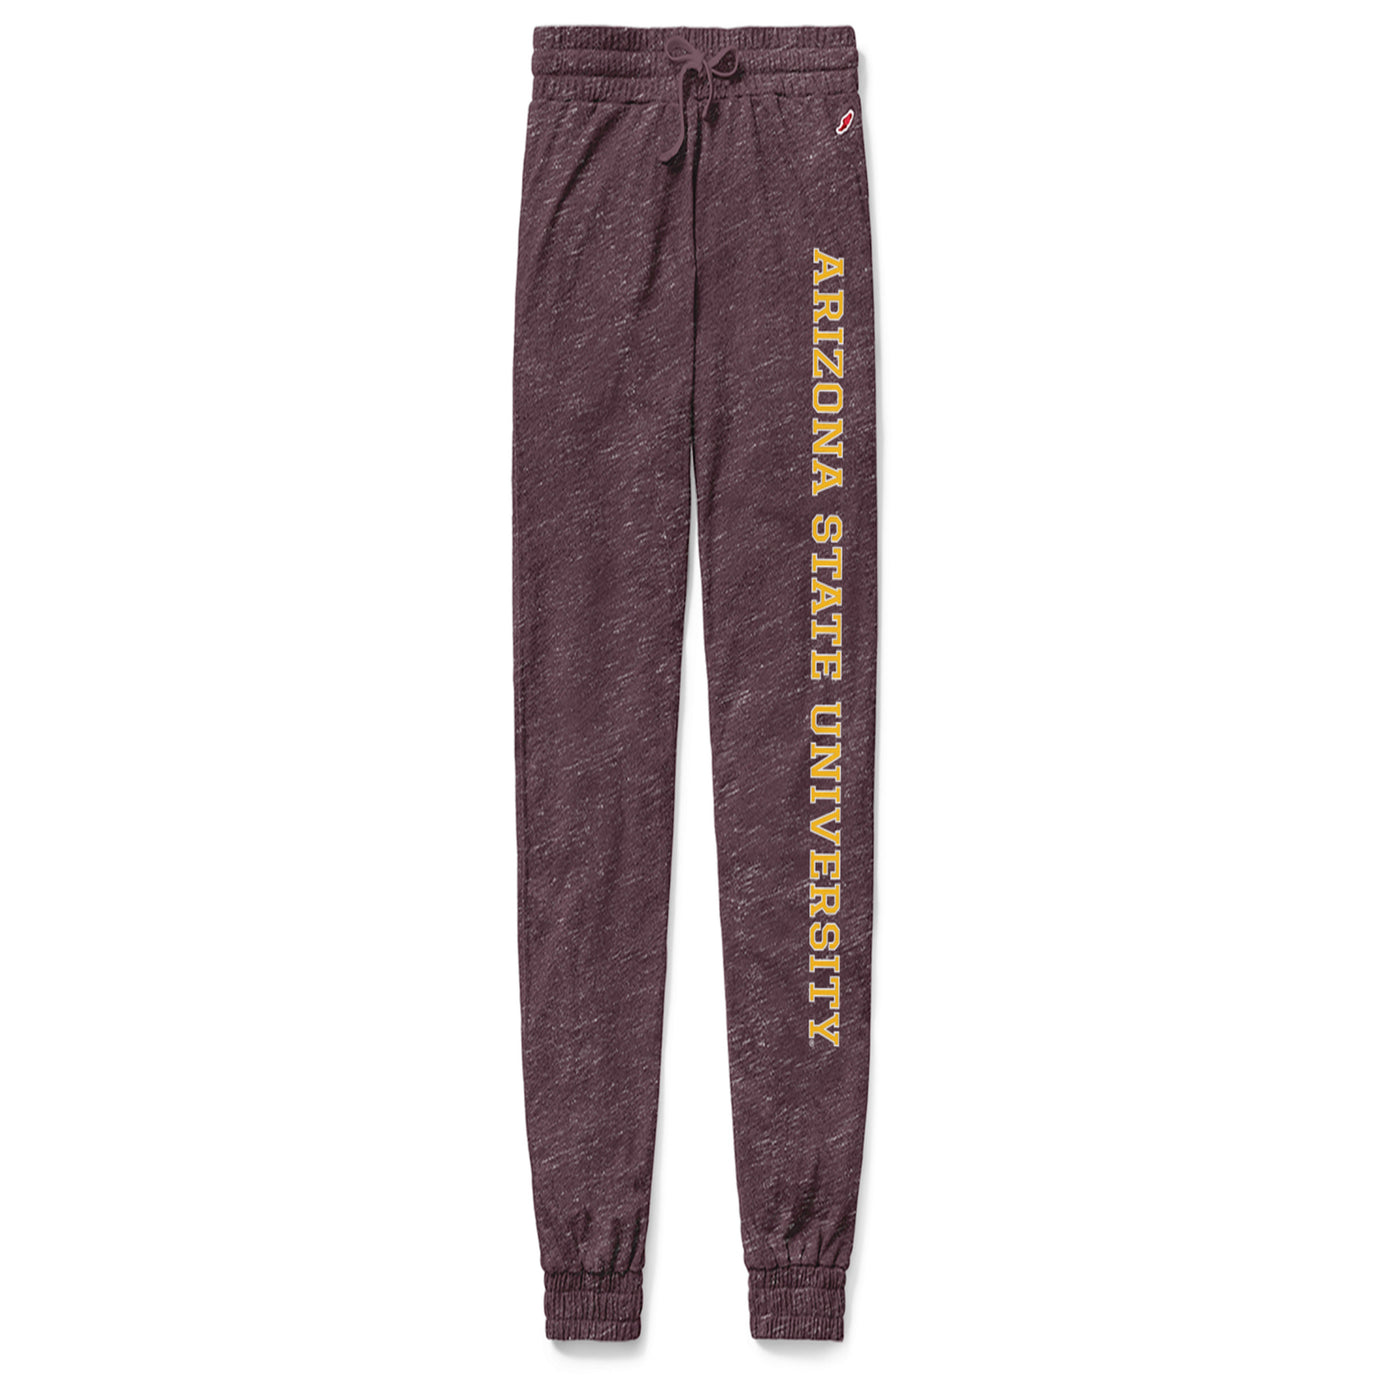 ASU women's maroon joggers with 'Arizona State University' lettering down the pant leg